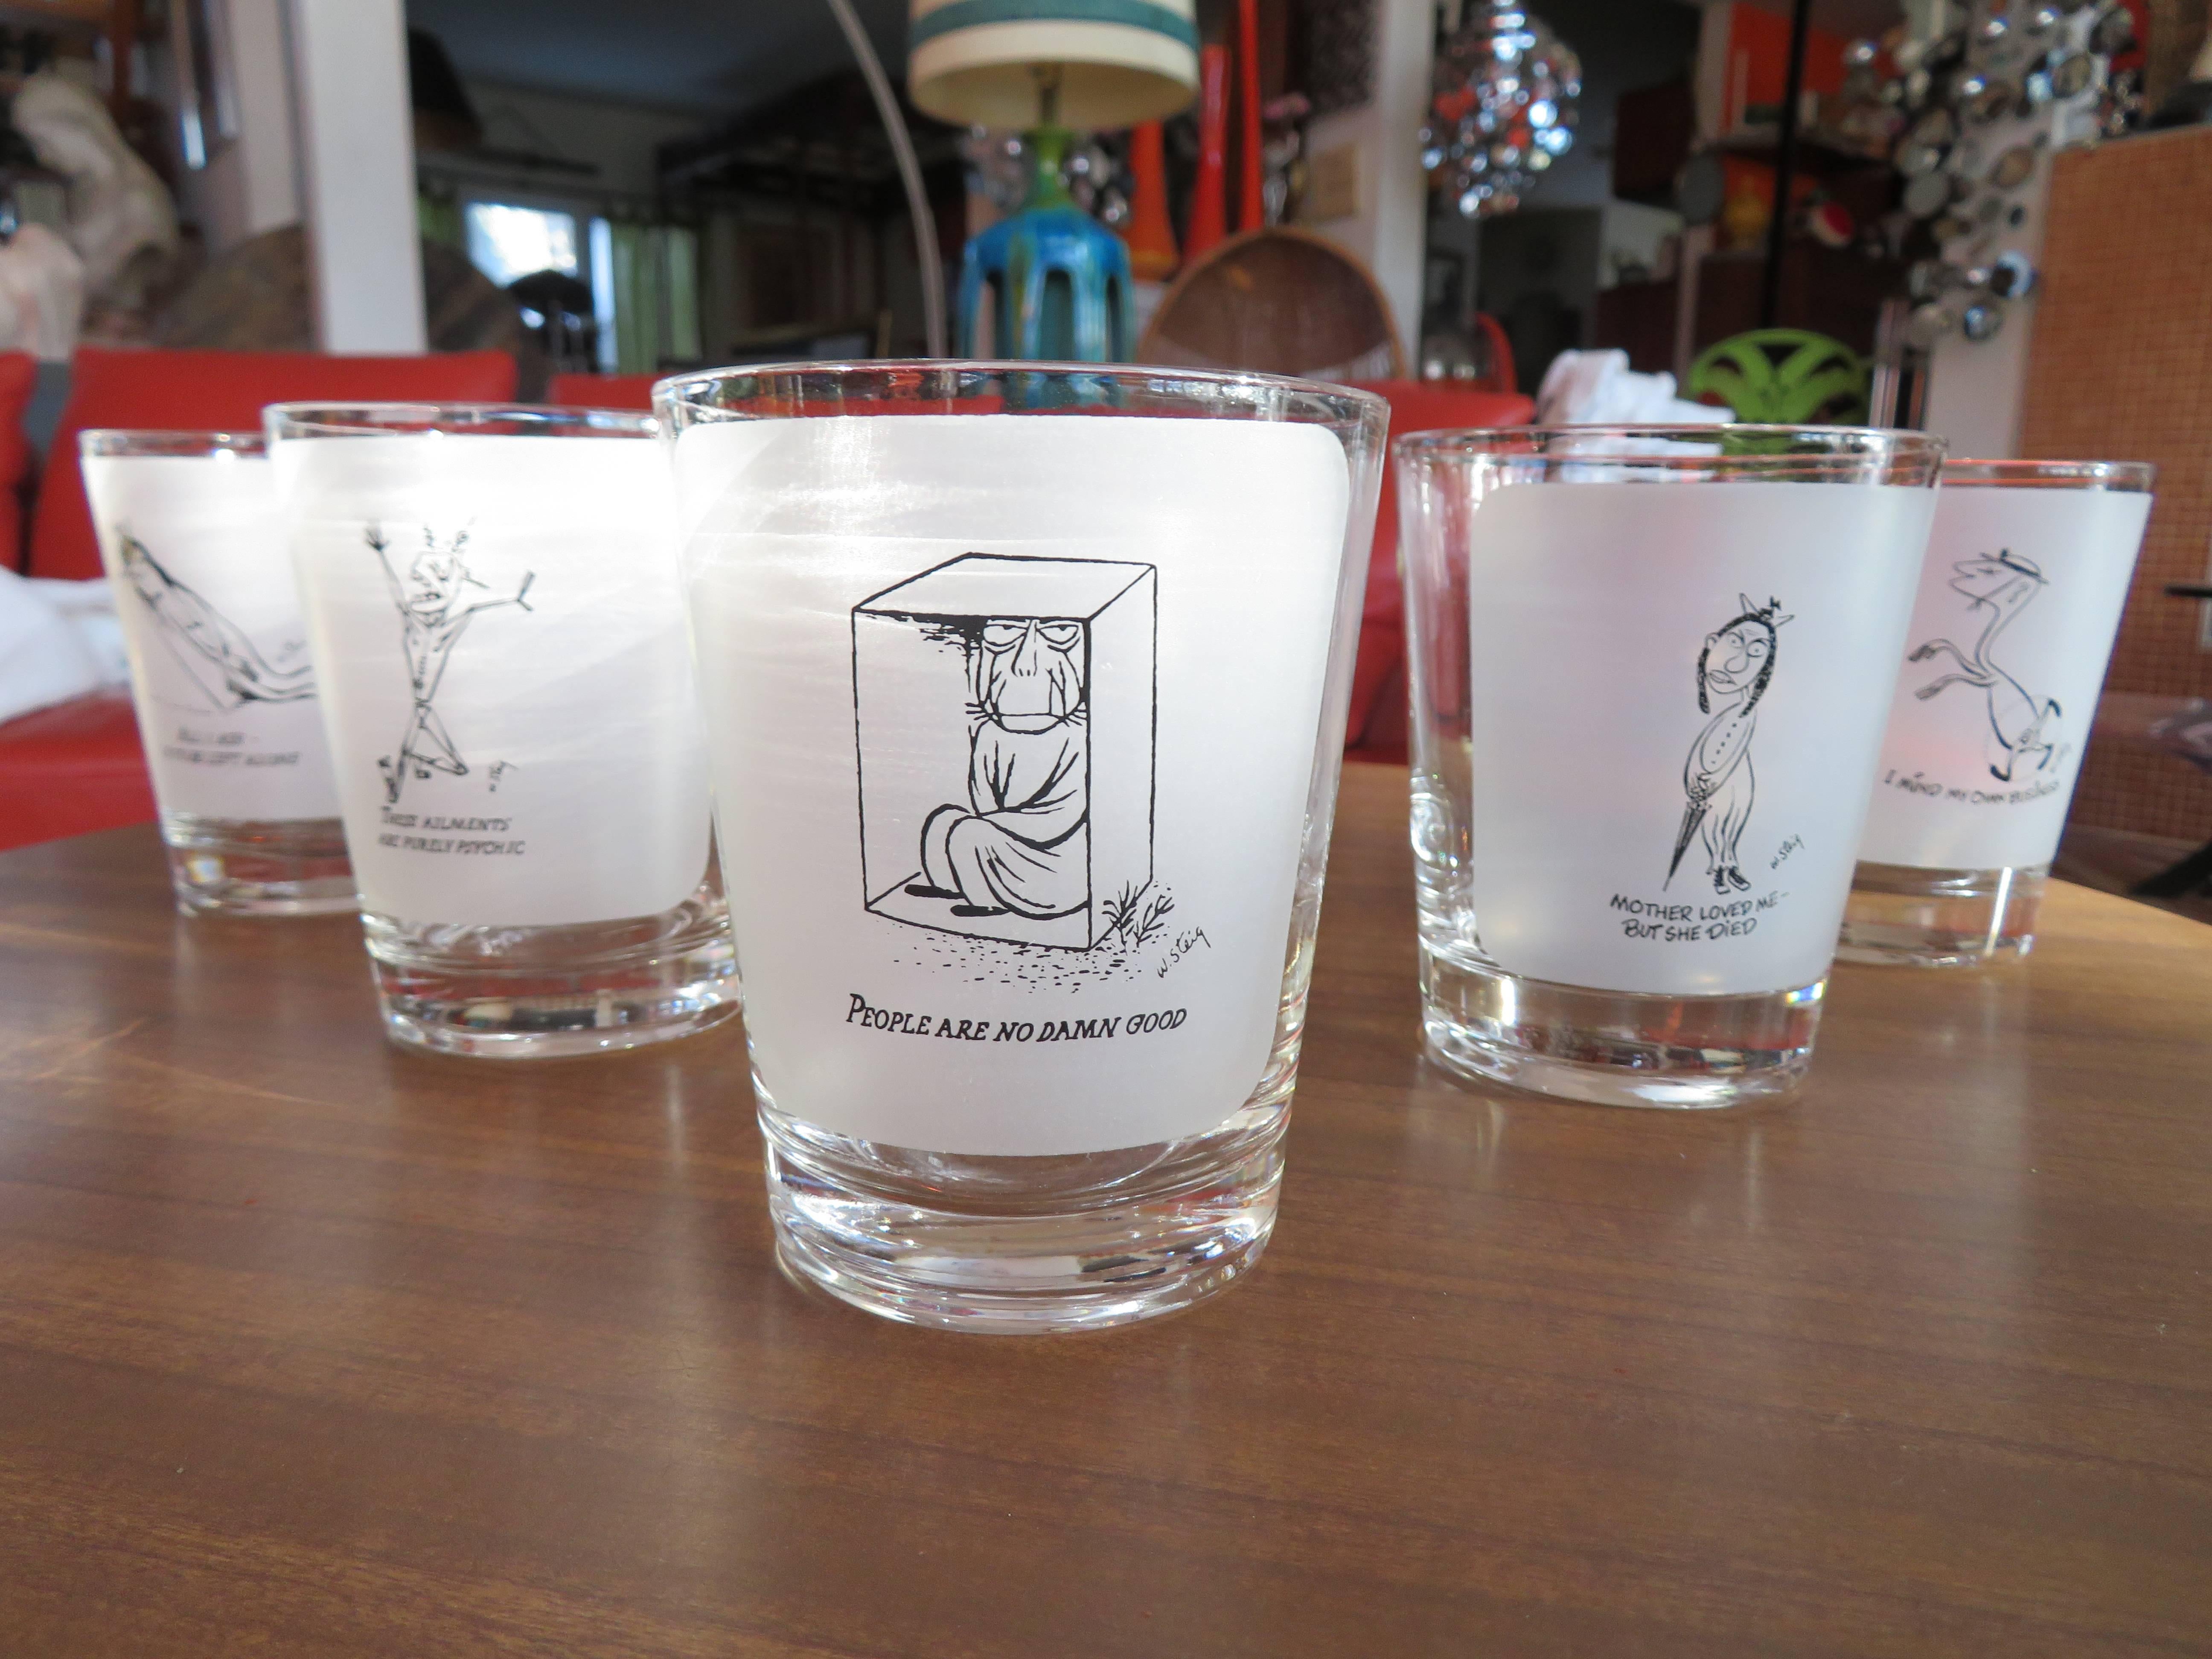 Set of six vintage rocks glasses by William Steig. William Steig created his amusing collection of dysfunctions, The Lonely Ones, in 1942. The popularity of the book inspired these bar glasses, which are most likely, circa 1950s. Steig is better